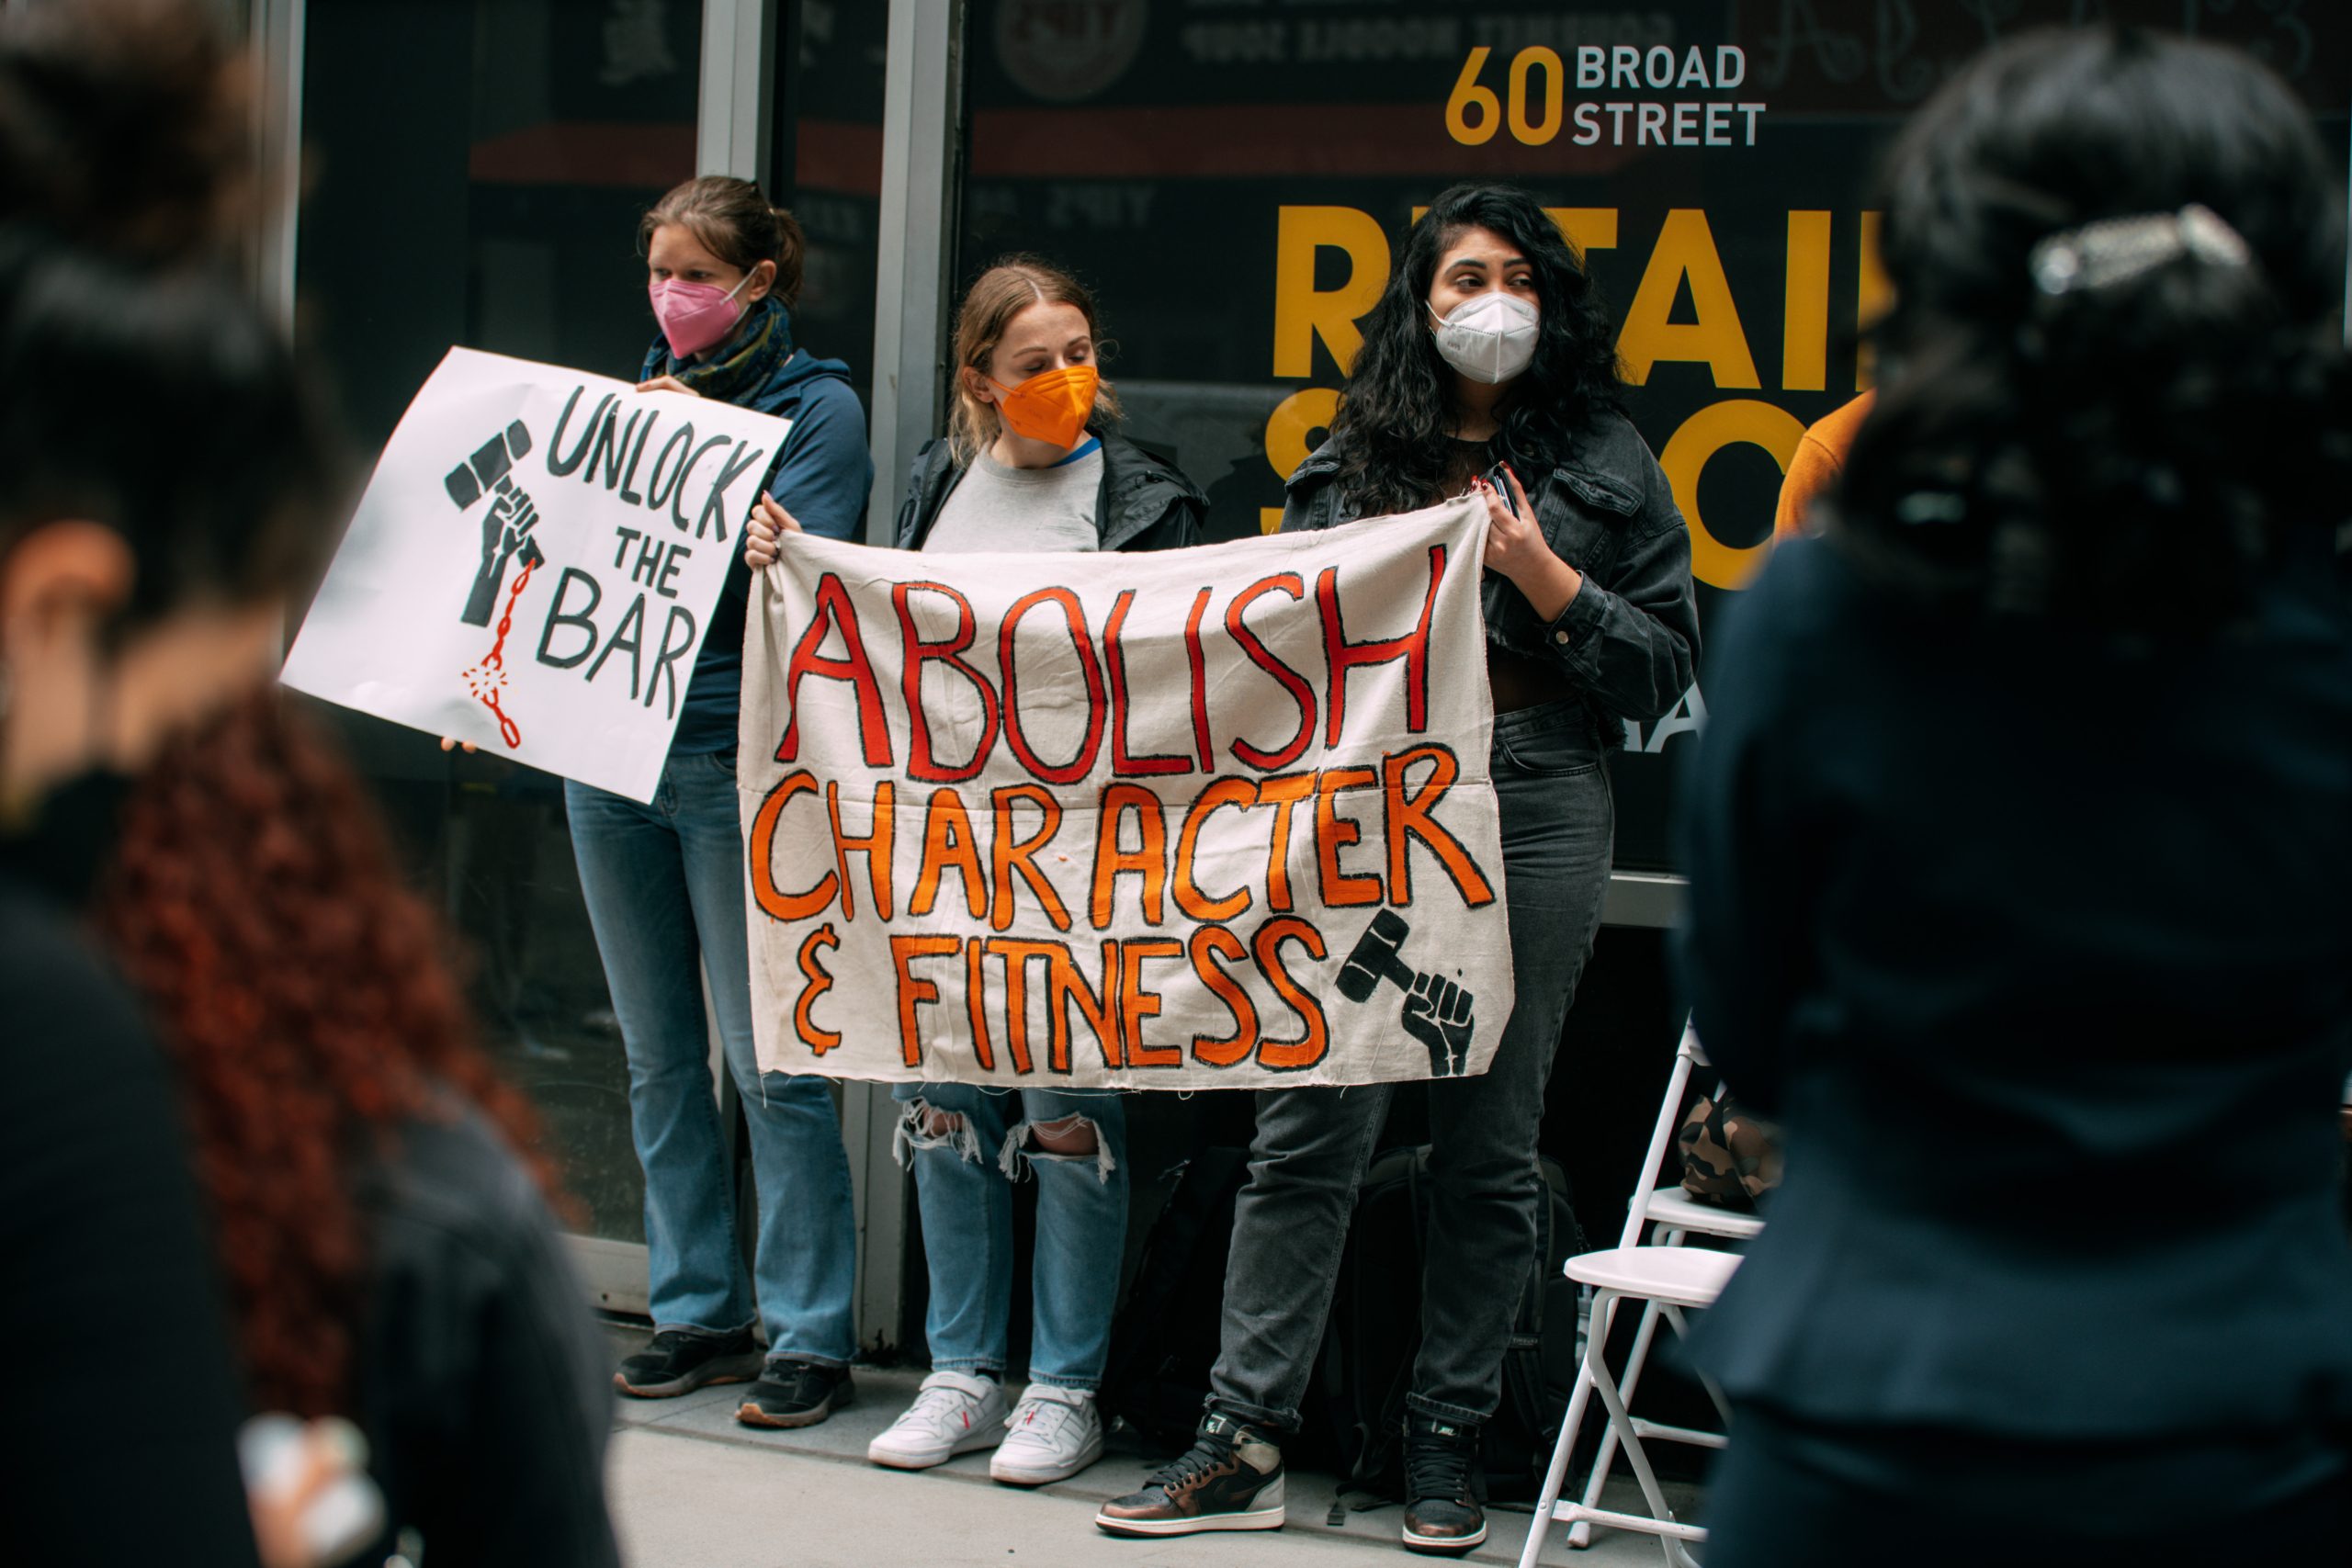 Three people on a sidewalk at a FILSAA event holding hand-painted banners, one reading Unlock the Bar and the other reading Abolish Character & Fitness